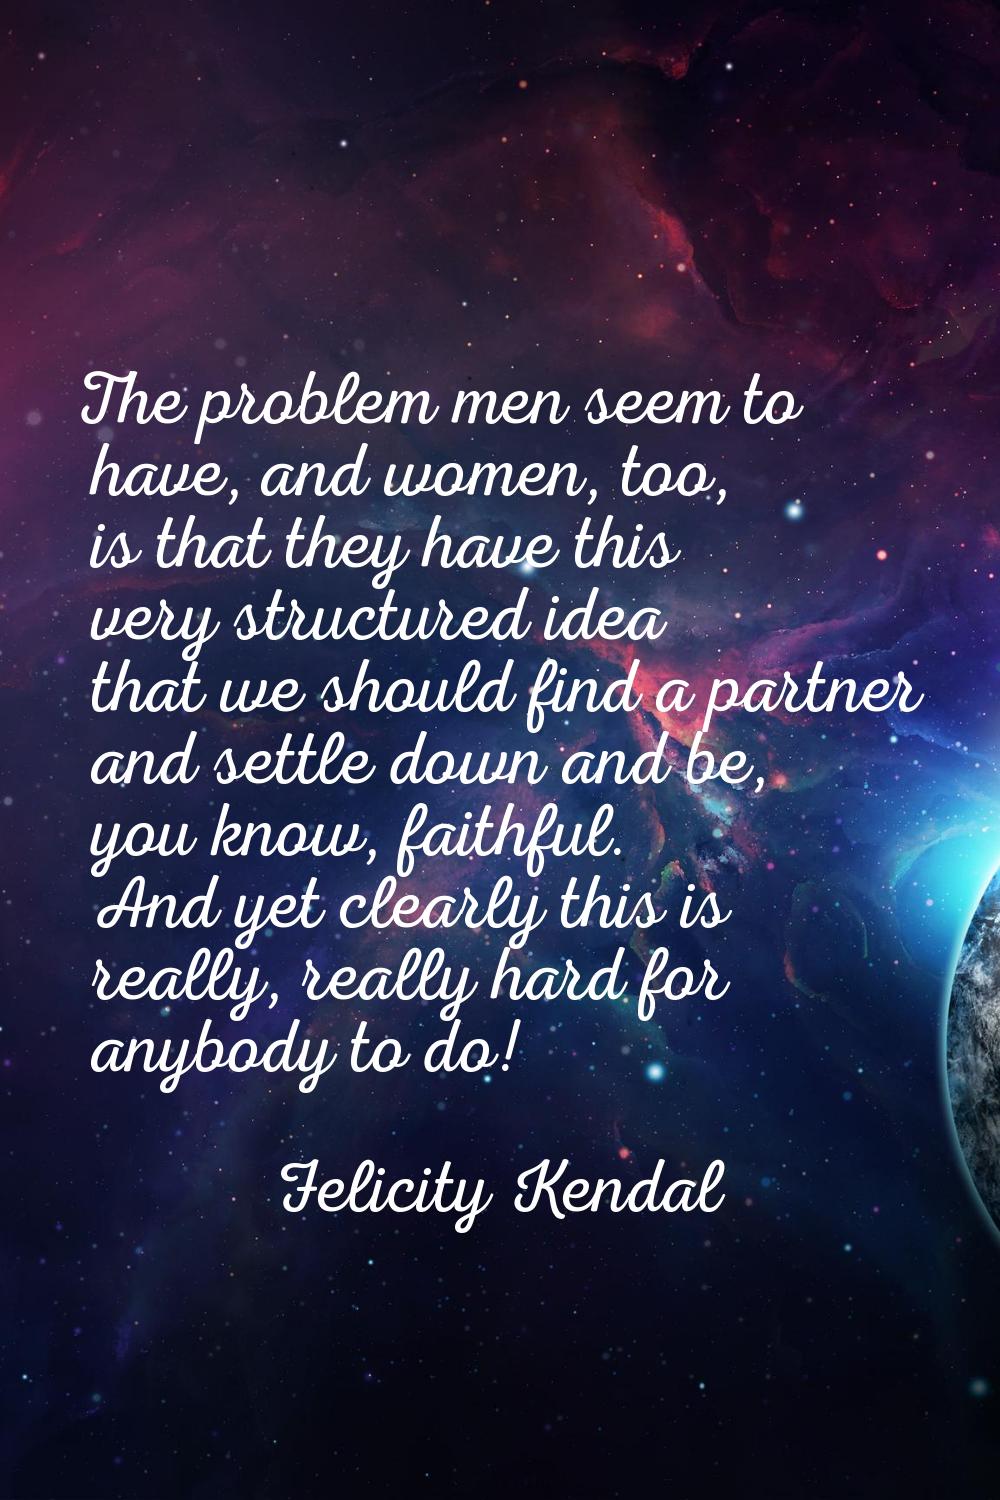 The problem men seem to have, and women, too, is that they have this very structured idea that we s